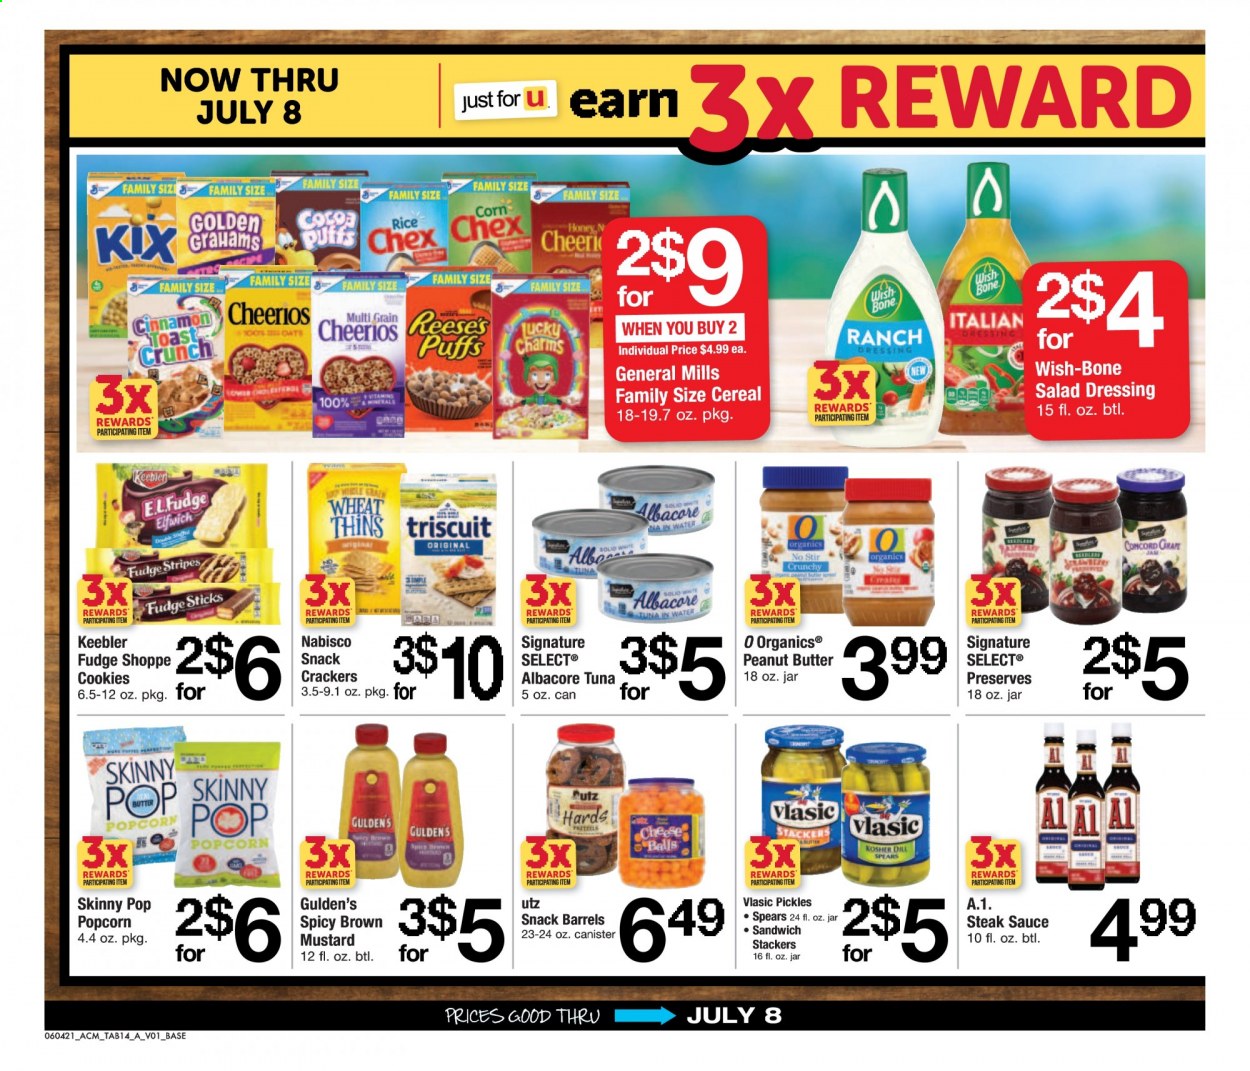 thumbnail - ACME Flyer - 06/04/2021 - 07/08/2021 - Sales products - puffs, corn, tuna, sandwich, sauce, ranch dressing, Reese's, cookies, fudge, snack, crackers, Keebler, Thins, popcorn, Skinny Pop, tuna in water, pickles, cereals, Cheerios, rice, dill, cinnamon, mustard, salad dressing, steak sauce, dressing, honey, fruit jam, peanut butter, steak. Page 14.